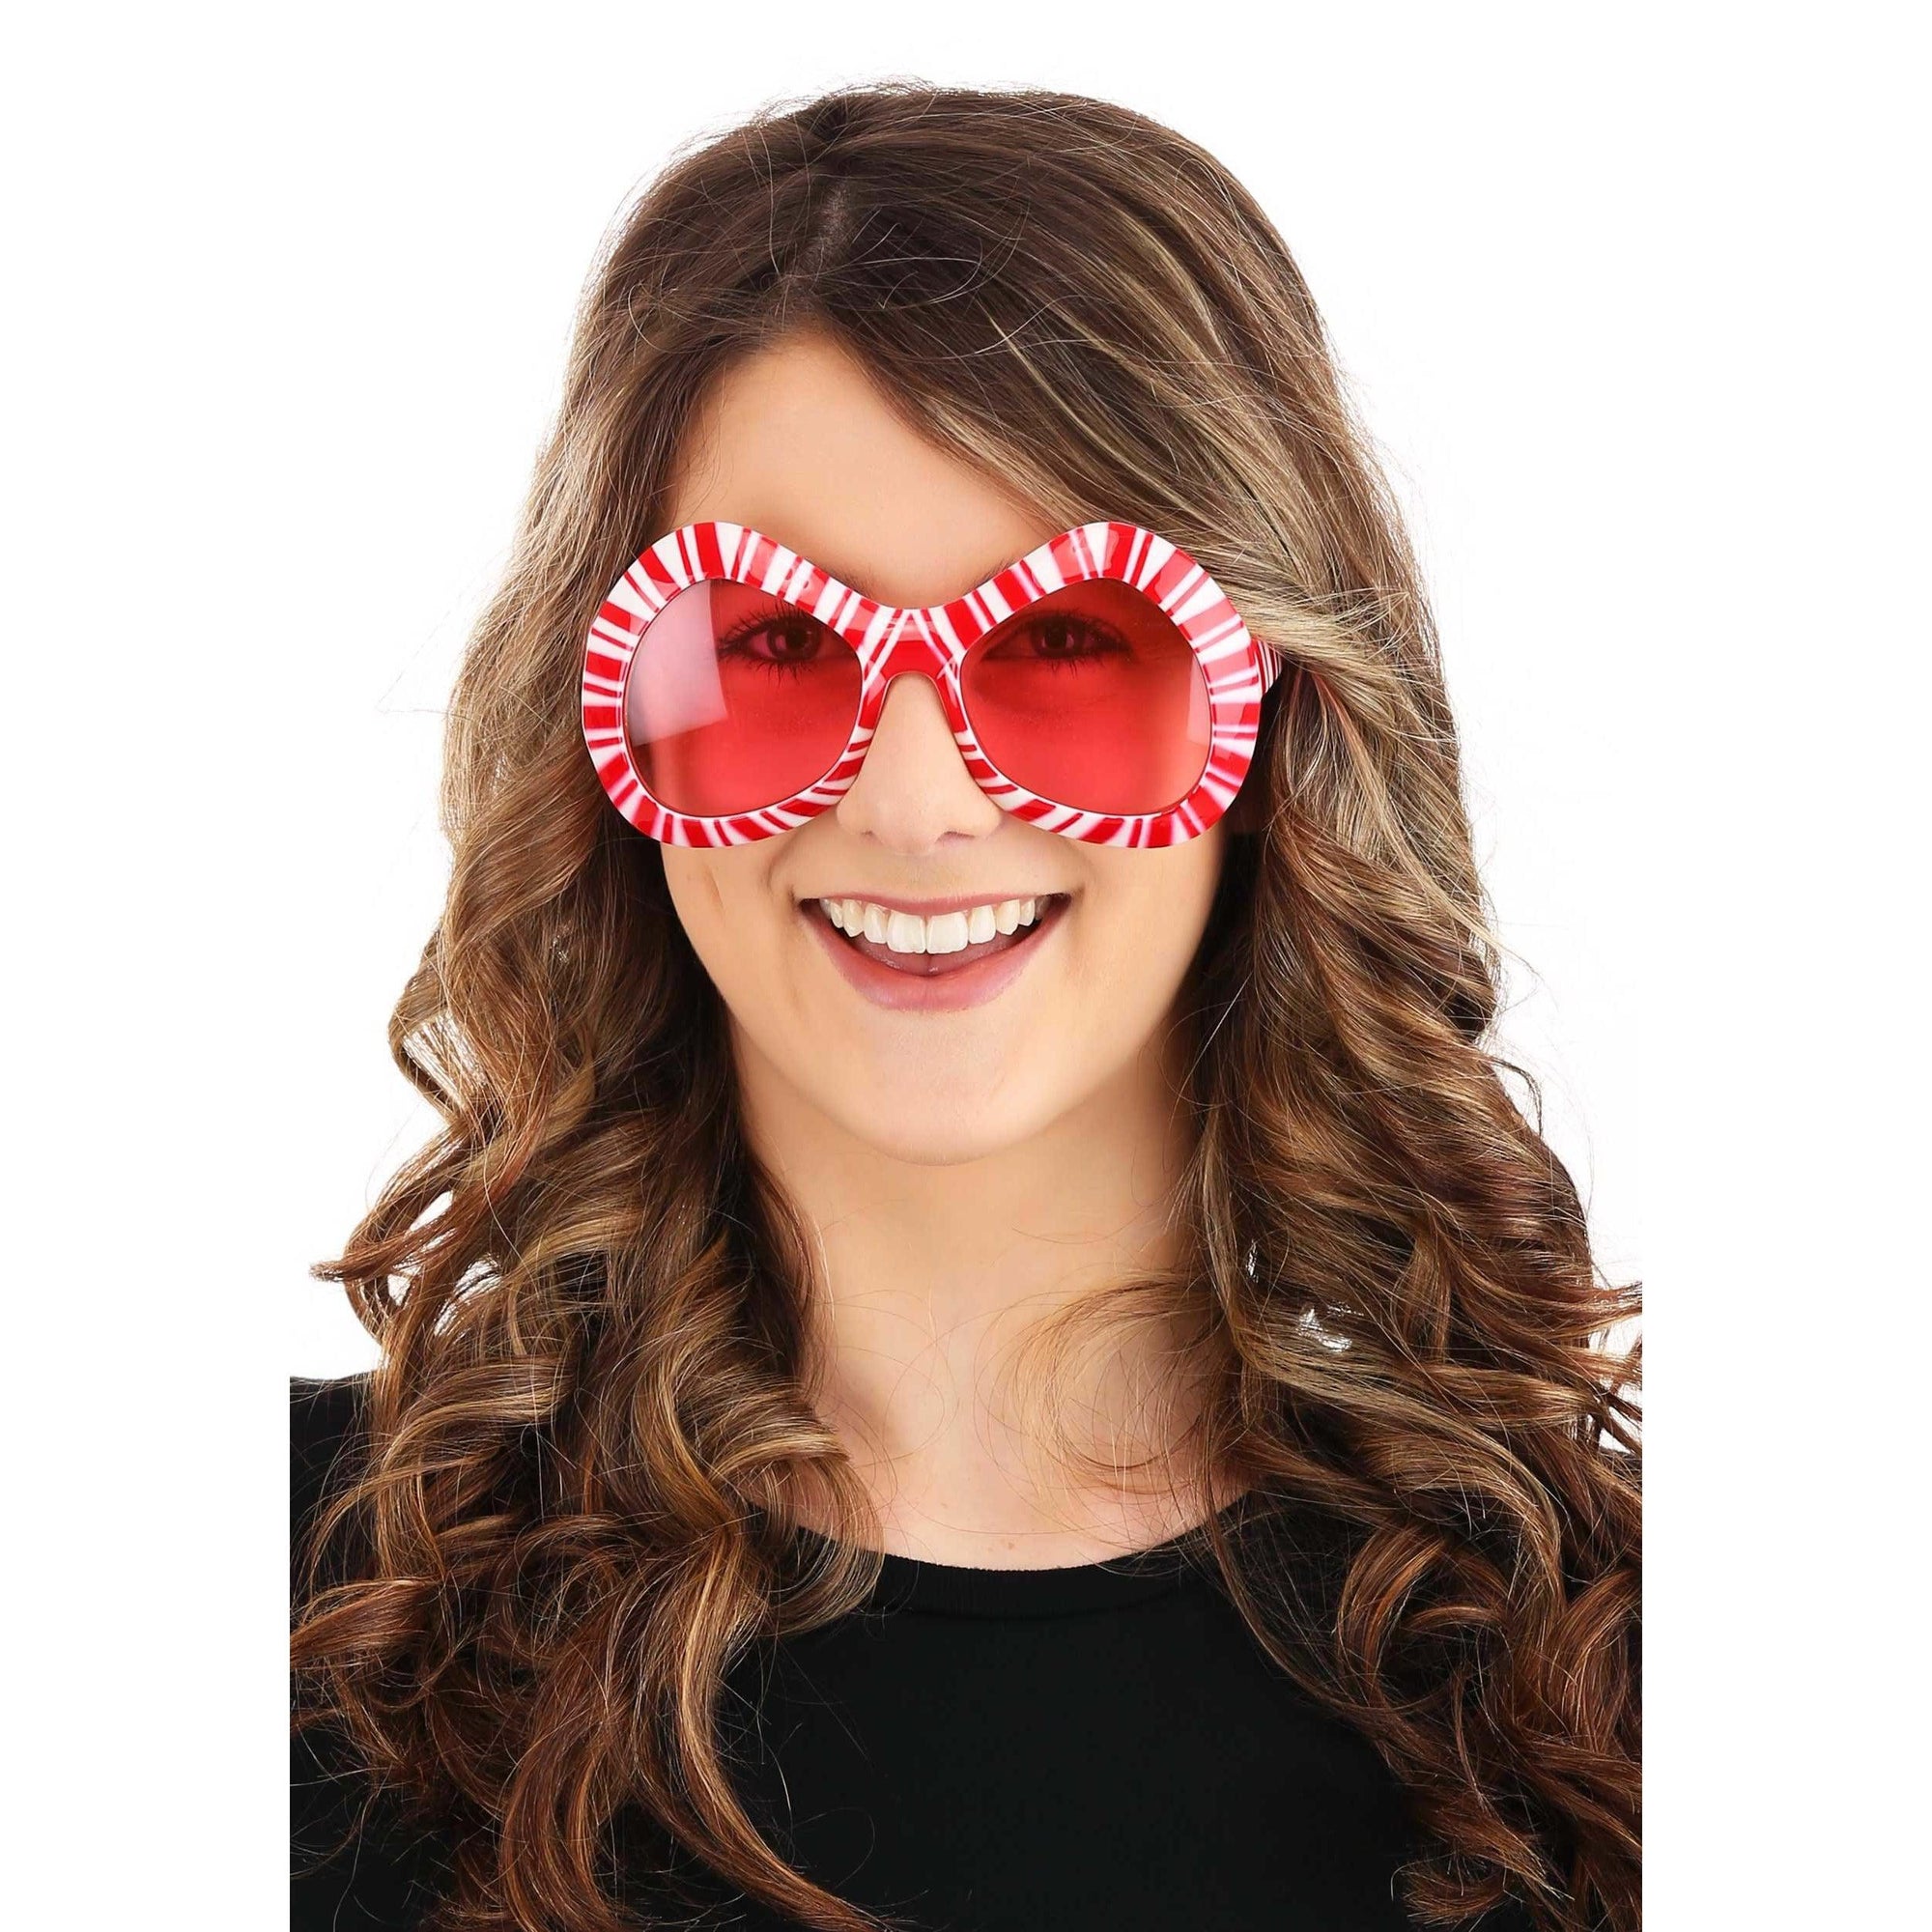 Front view of the Mod candy Cane glasses against a white background. The glasses are angled to the left.